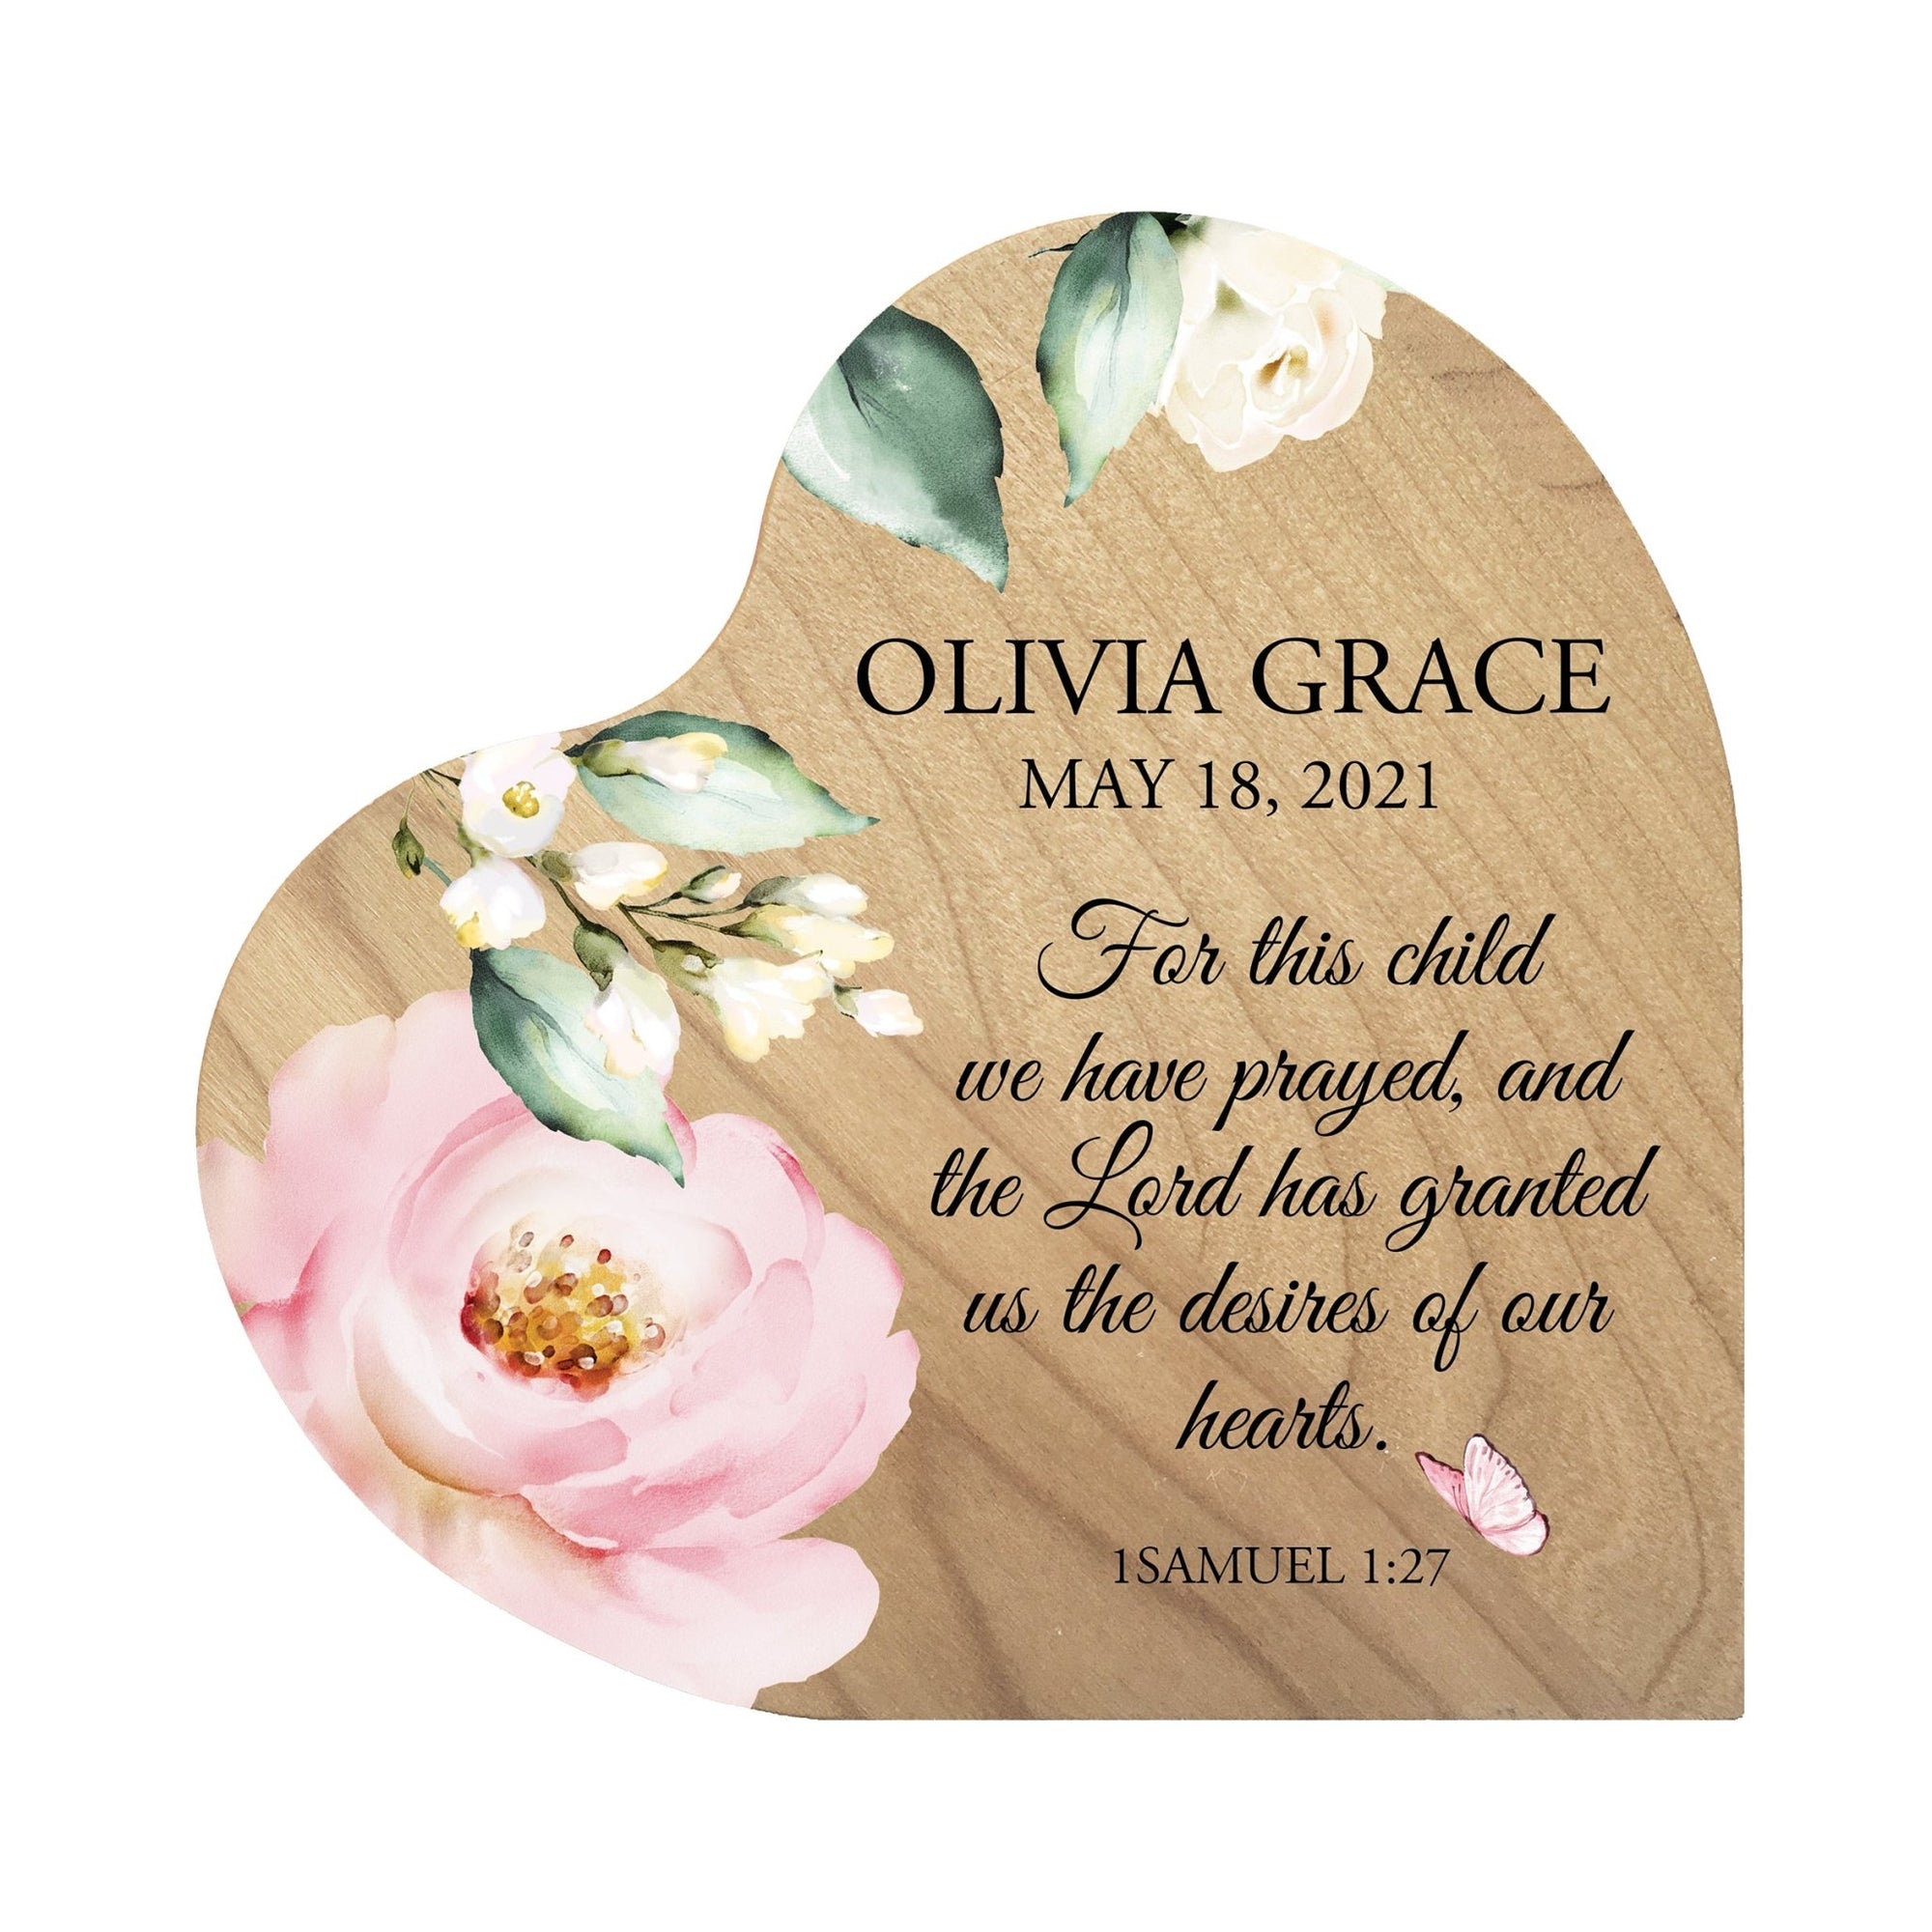 Personalized Gifts for godparents from godchild